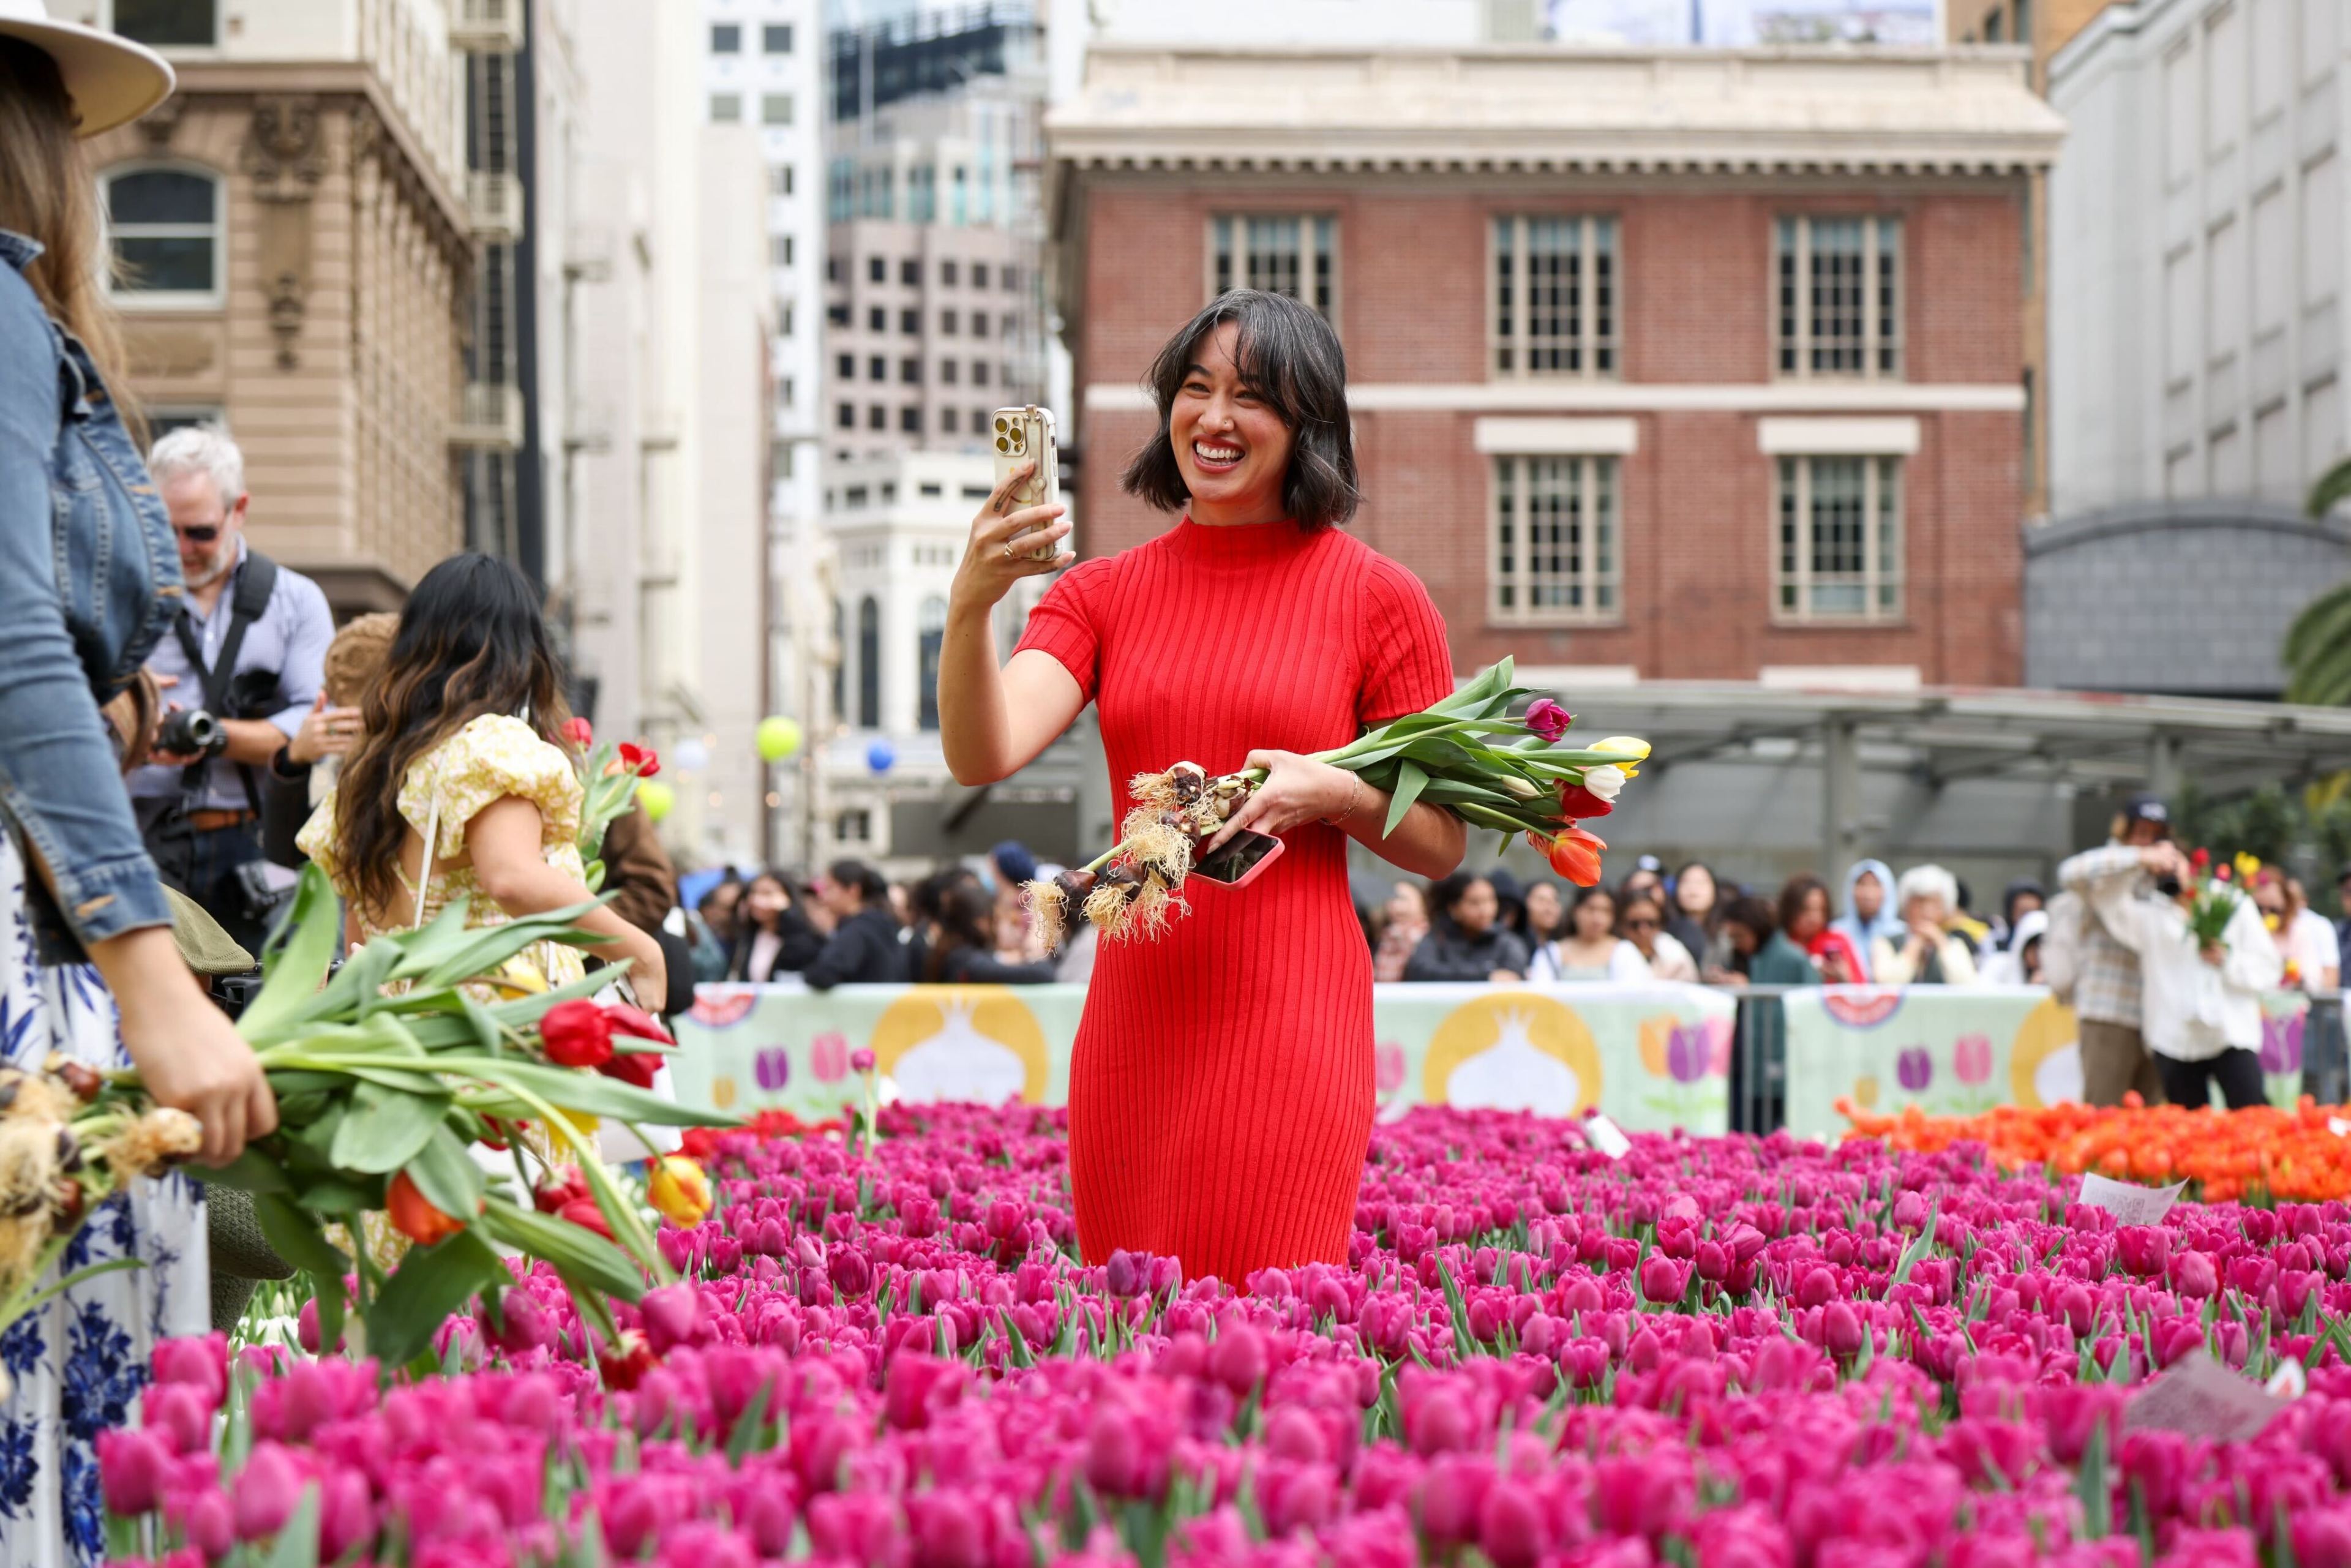 A woman in a red dress smiles among vibrant tulips, taking a selfie with her phone.